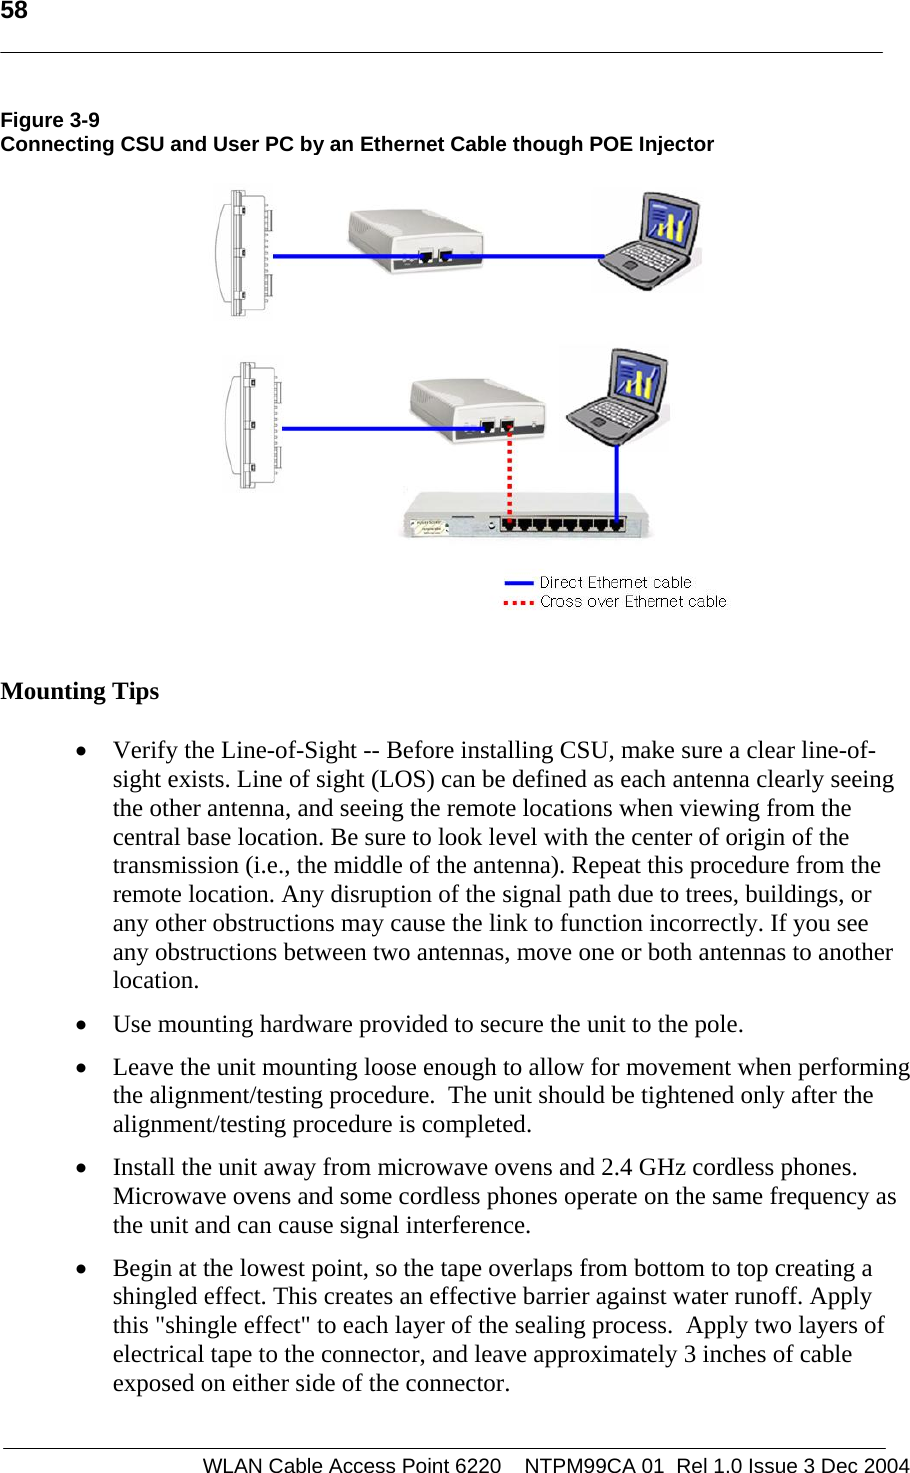   58    WLAN Cable Access Point 6220    NTPM99CA 01  Rel 1.0 Issue 3 Dec 2004 Figure 3-9 Connecting CSU and User PC by an Ethernet Cable though POE Injector    Mounting Tips  • Verify the Line-of-Sight -- Before installing CSU, make sure a clear line-of-sight exists. Line of sight (LOS) can be defined as each antenna clearly seeing the other antenna, and seeing the remote locations when viewing from the central base location. Be sure to look level with the center of origin of the transmission (i.e., the middle of the antenna). Repeat this procedure from the remote location. Any disruption of the signal path due to trees, buildings, or any other obstructions may cause the link to function incorrectly. If you see any obstructions between two antennas, move one or both antennas to another location. • Use mounting hardware provided to secure the unit to the pole.   • Leave the unit mounting loose enough to allow for movement when performing the alignment/testing procedure.  The unit should be tightened only after the alignment/testing procedure is completed.  • Install the unit away from microwave ovens and 2.4 GHz cordless phones. Microwave ovens and some cordless phones operate on the same frequency as the unit and can cause signal interference. • Begin at the lowest point, so the tape overlaps from bottom to top creating a shingled effect. This creates an effective barrier against water runoff. Apply this &quot;shingle effect&quot; to each layer of the sealing process.  Apply two layers of electrical tape to the connector, and leave approximately 3 inches of cable exposed on either side of the connector. 